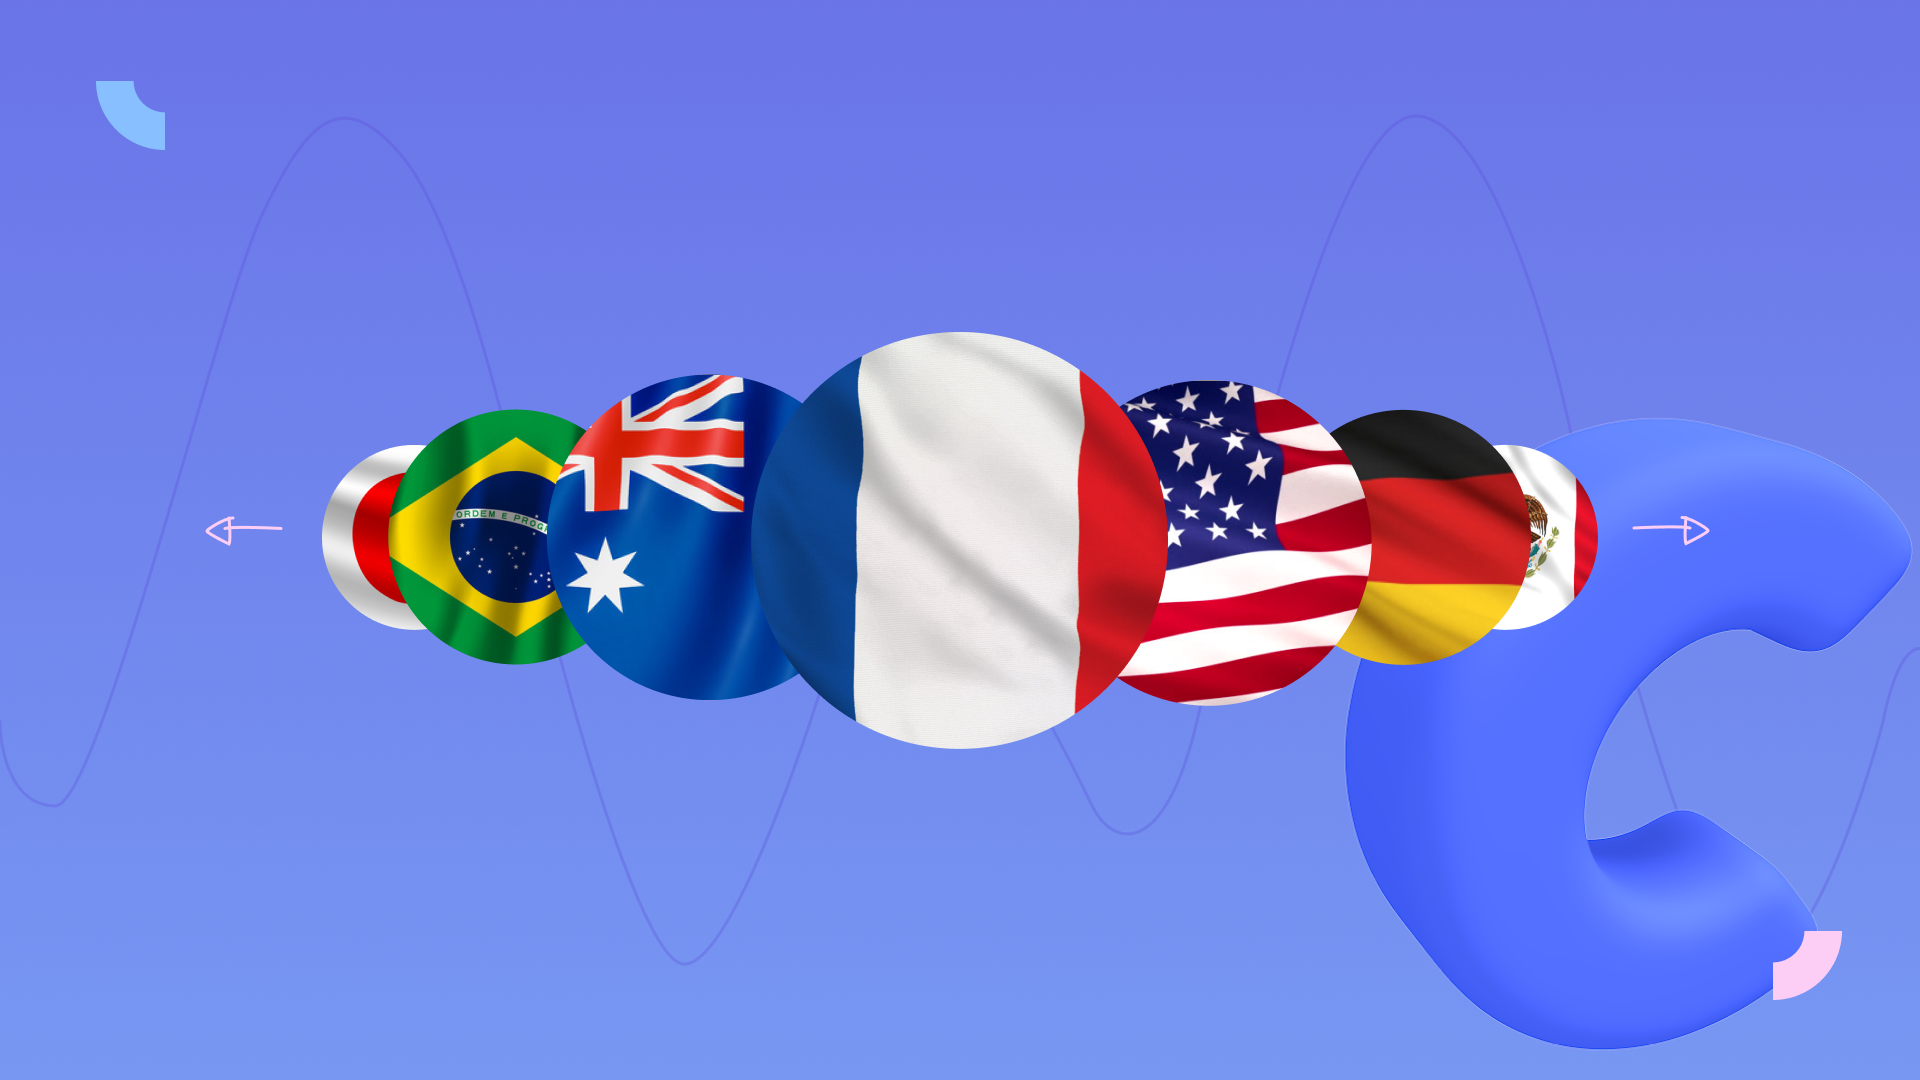 Pictures of national flags represent the wide variety of languages supported by Clipchamp's text to speech generator.